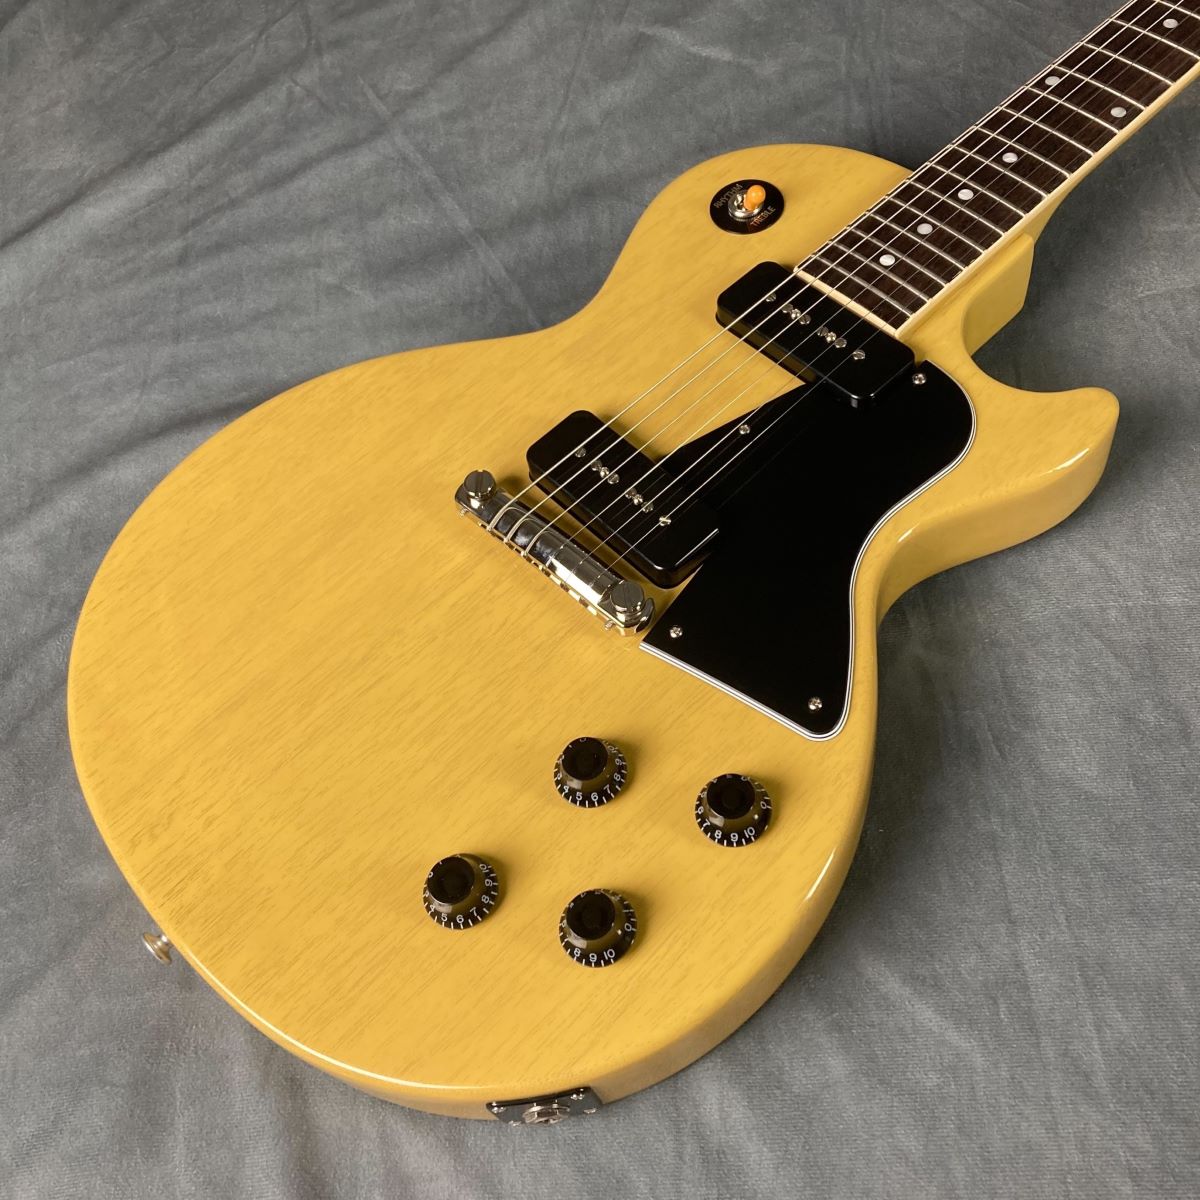 Gibson Les Paul Special TV Yellow レスポールスペシャル ギブソン